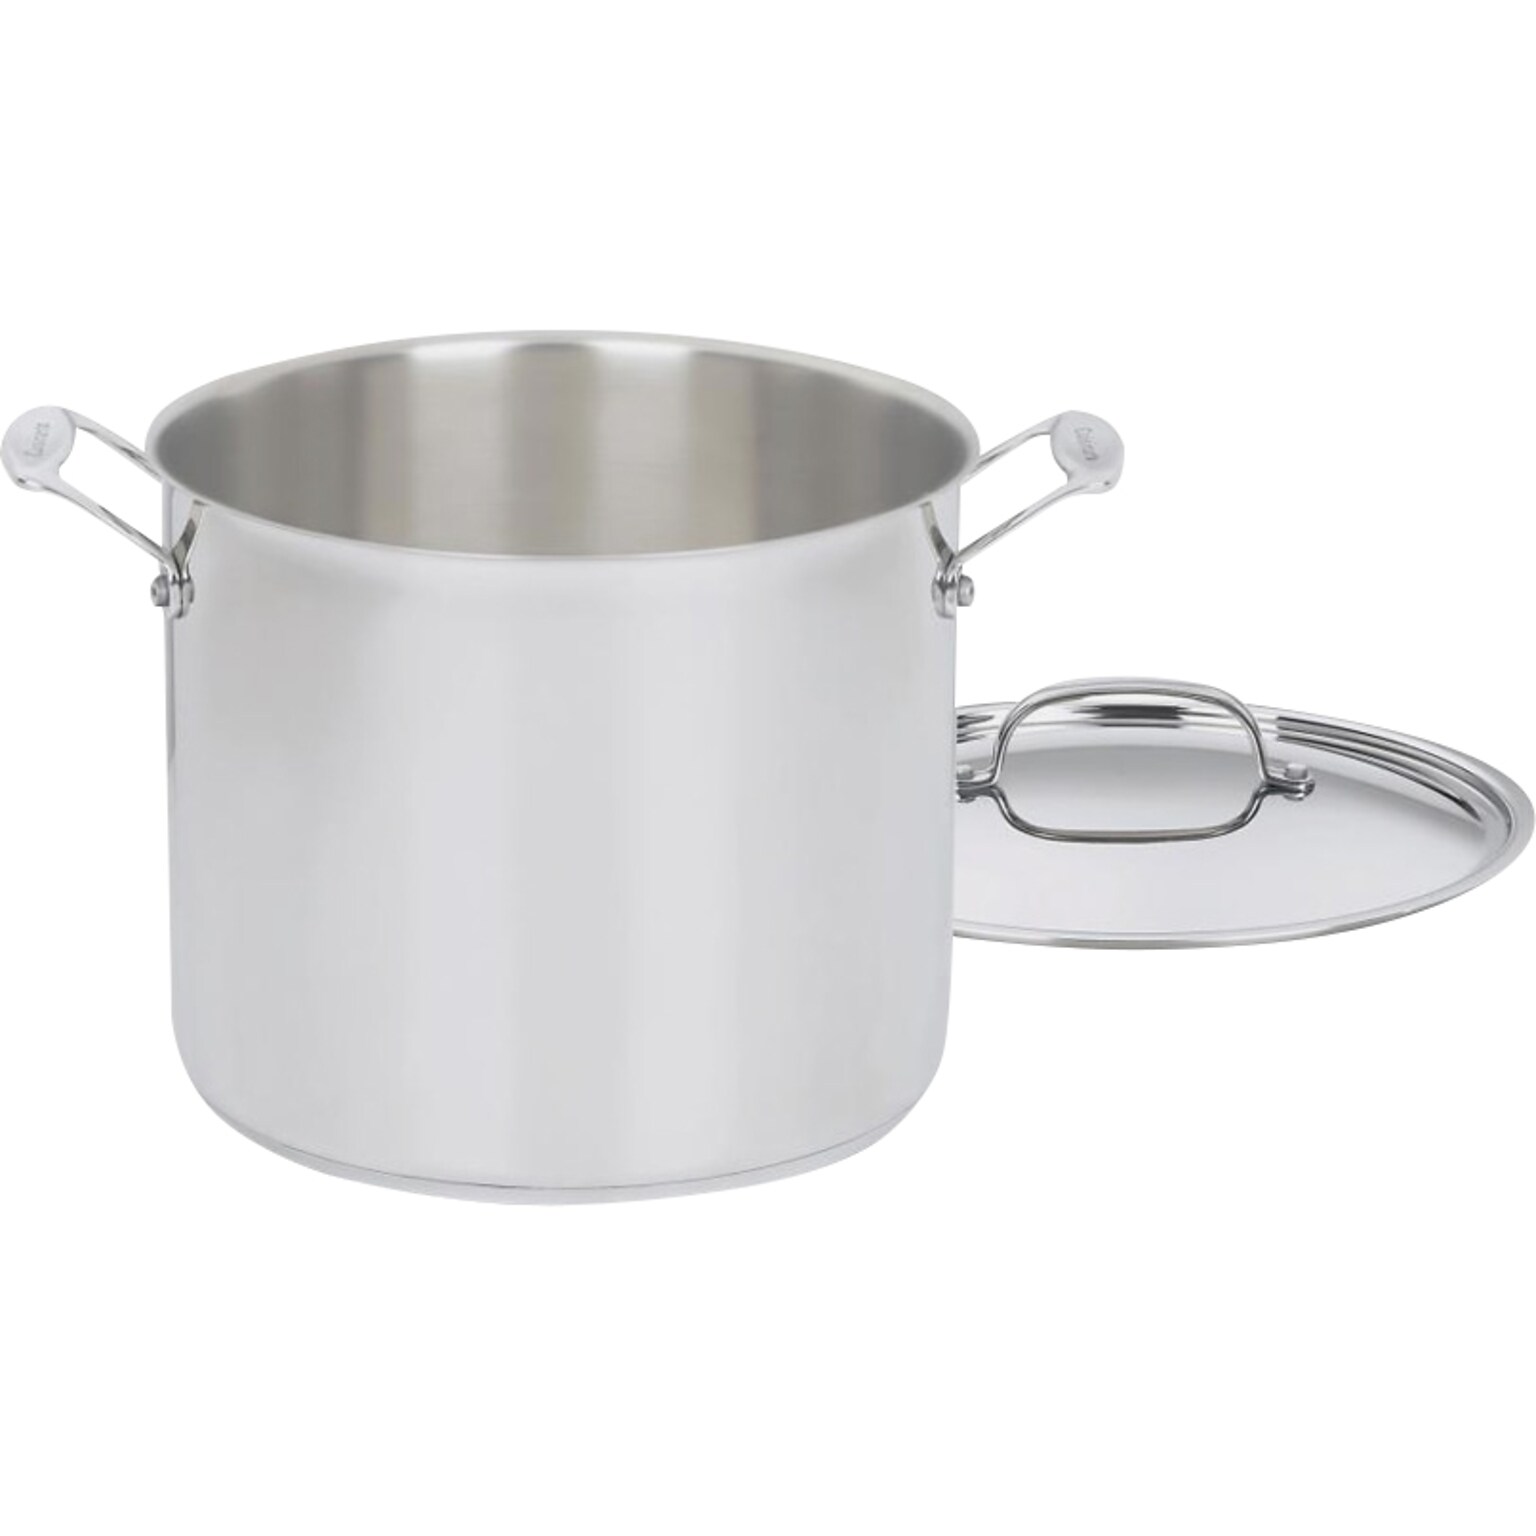 Cuisinart Chefs Classic Stainless Steel 12 Qt. Stock Pot with Cover, Silver (766-26)